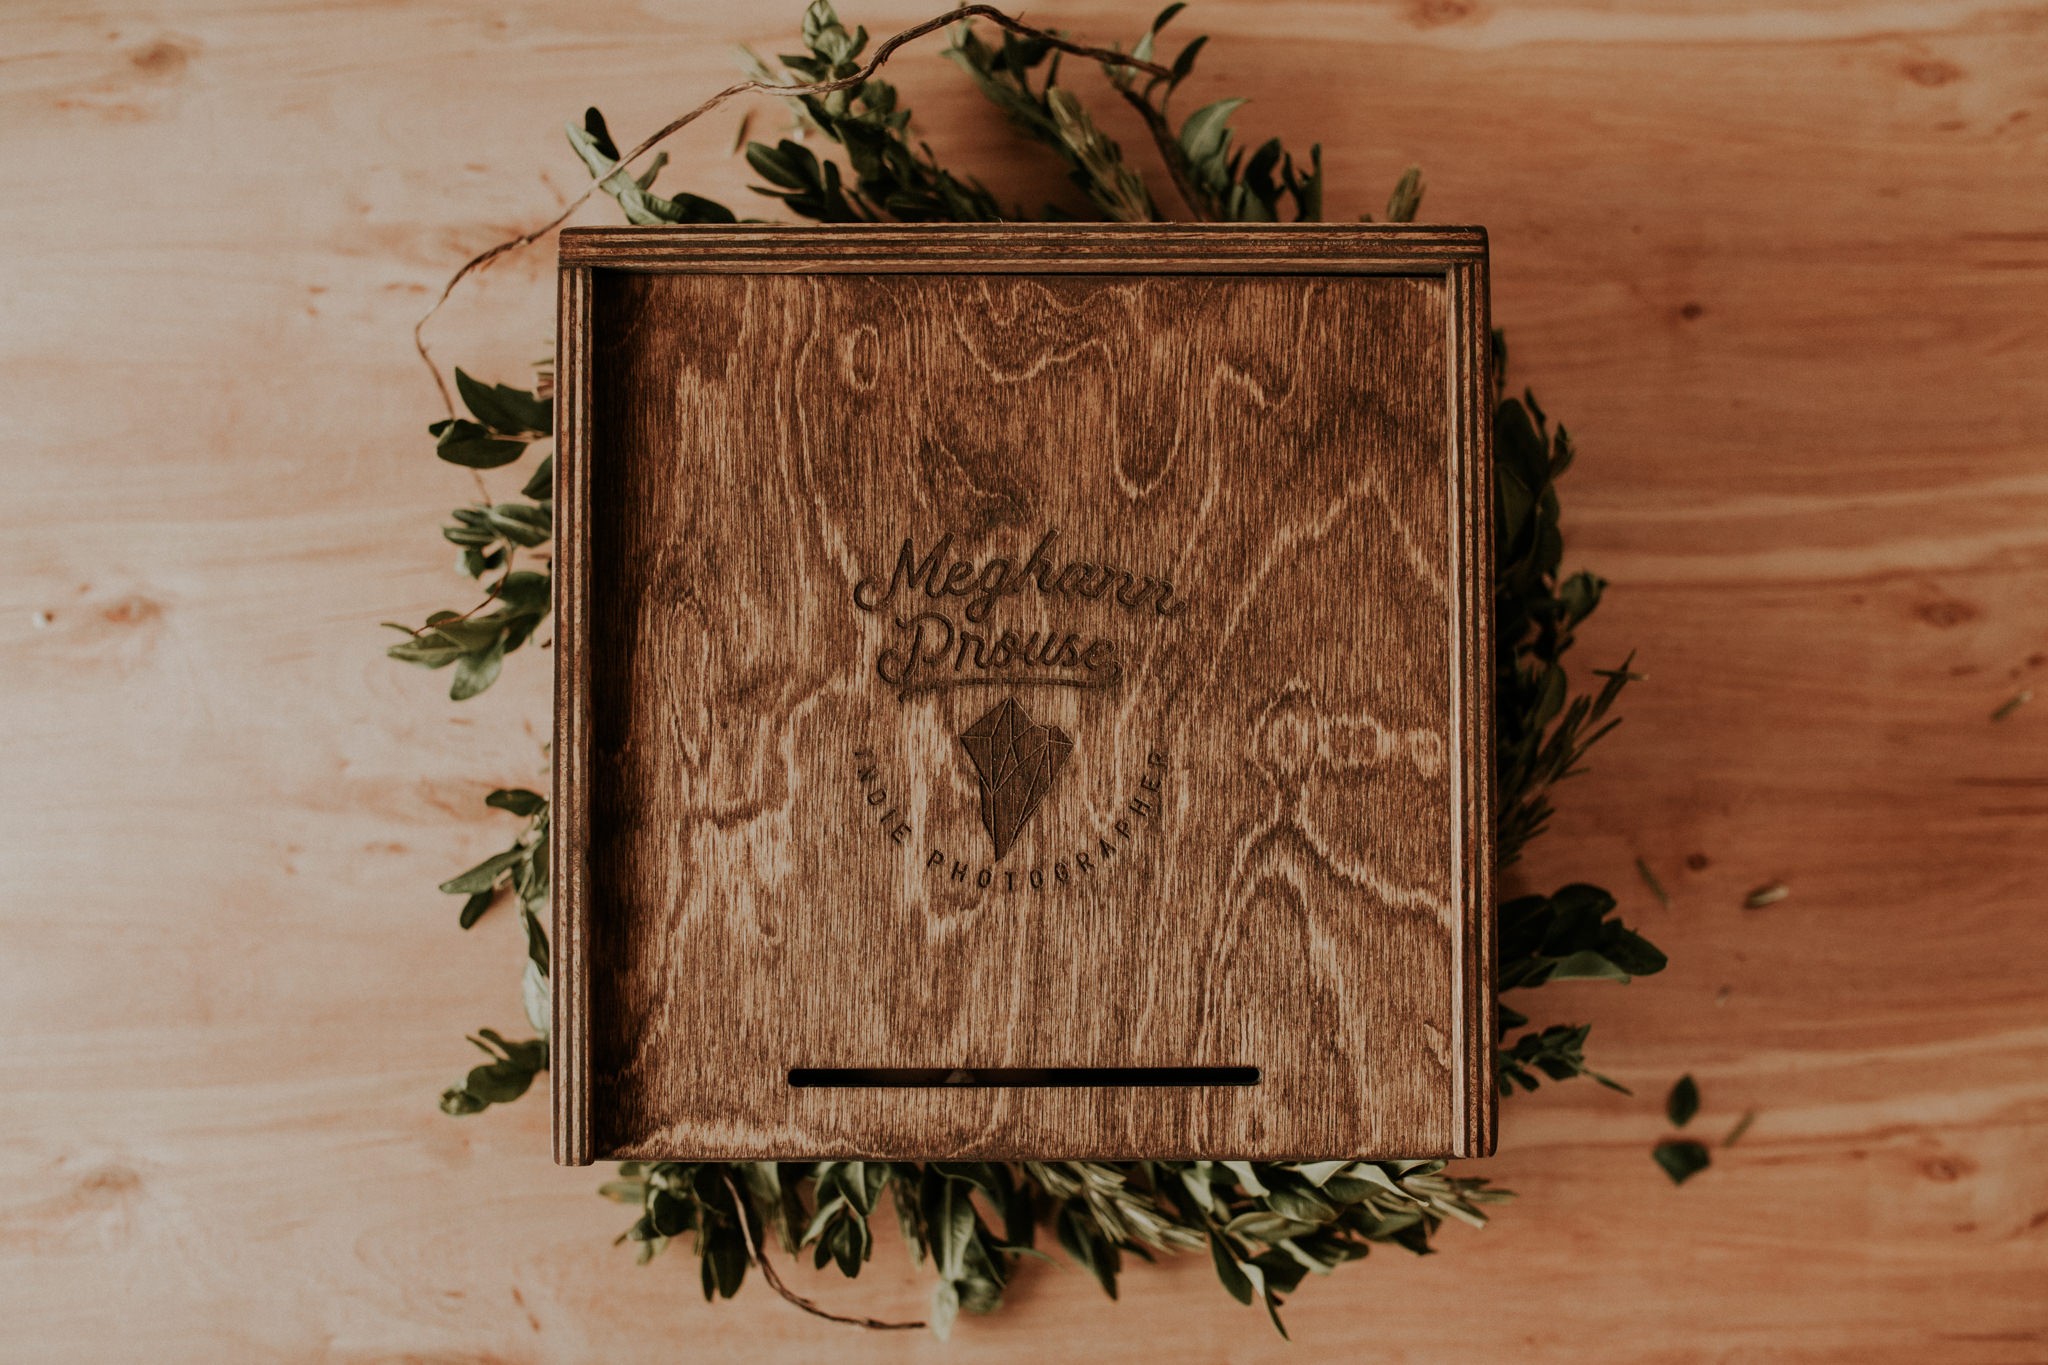 Rustic wooden keepsake box for photographs, complimentary with Meghann Prouse, Indie Photographer's wedding collections. 